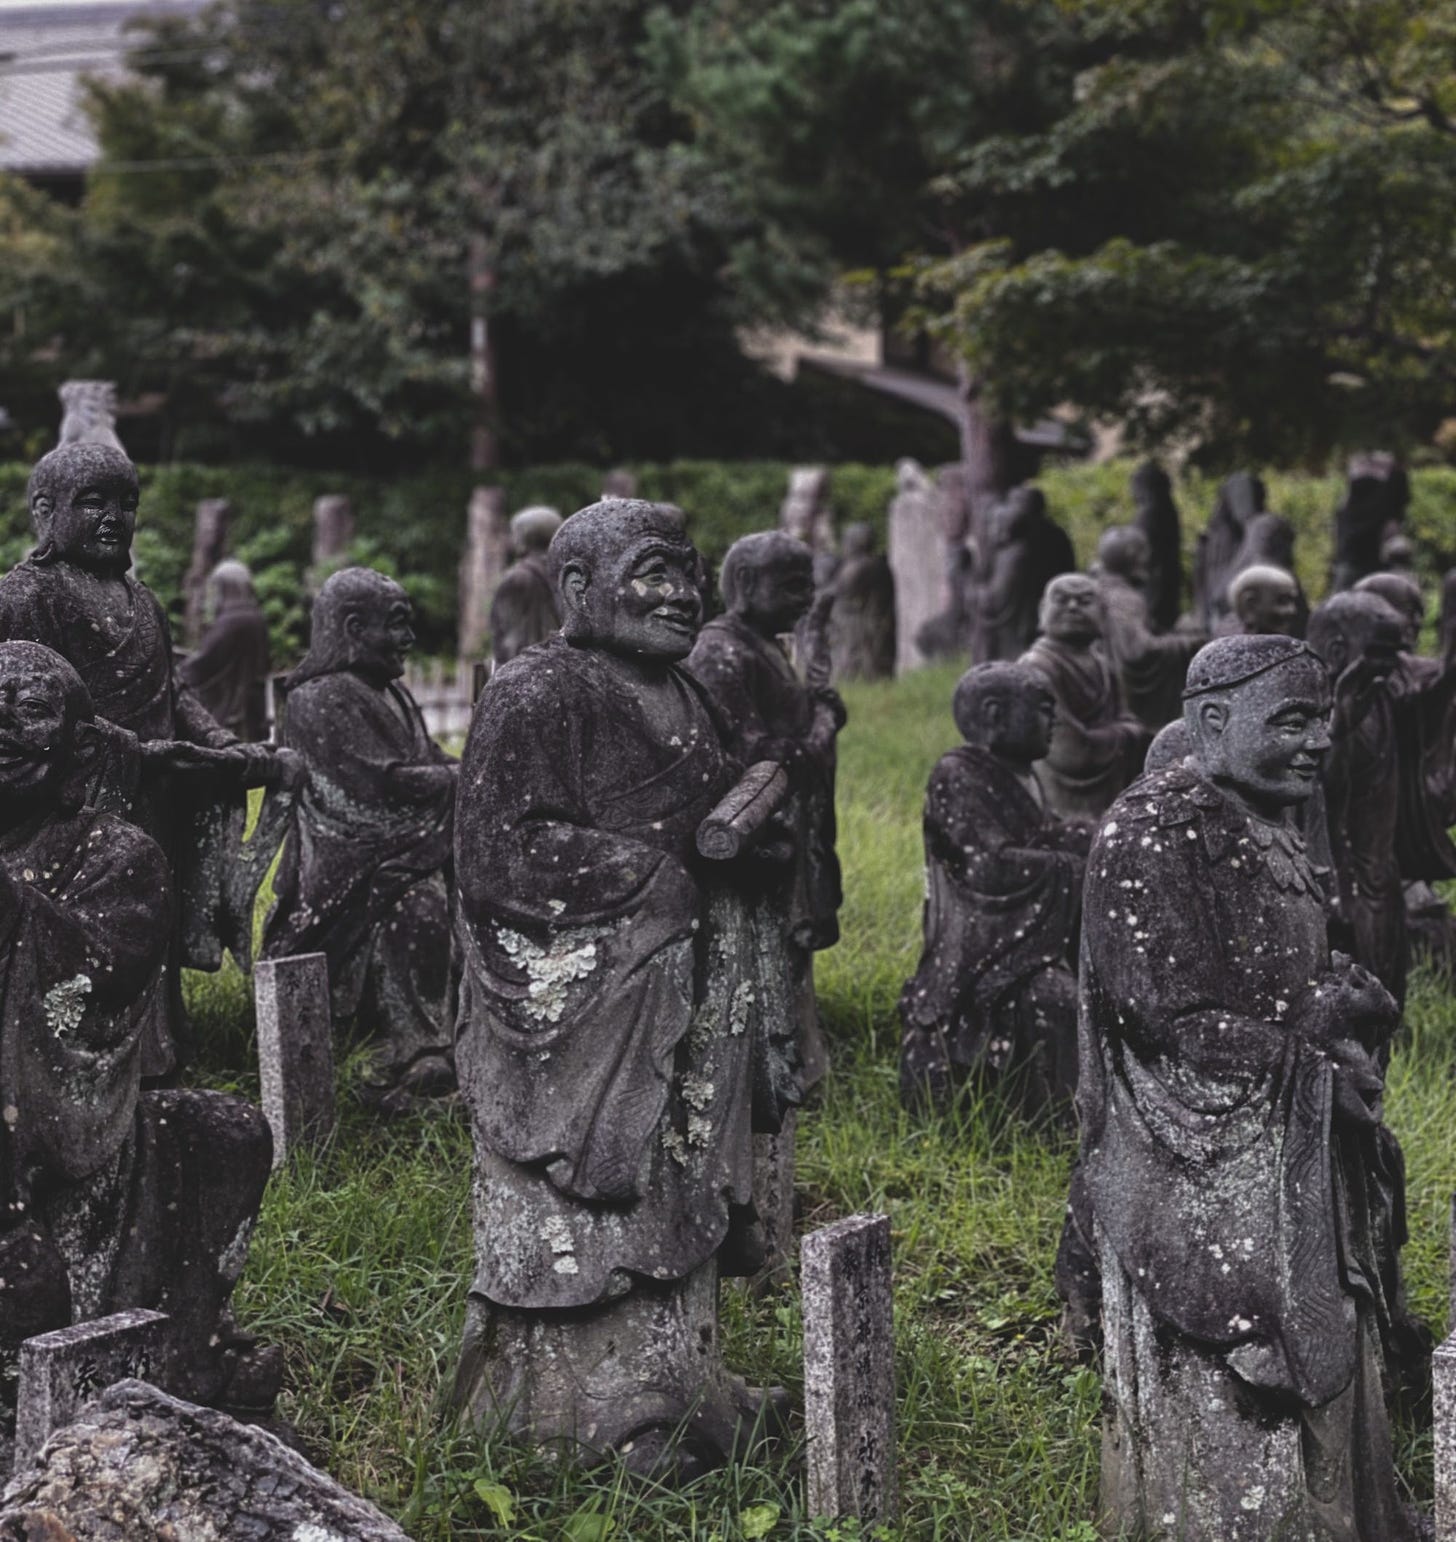 Photo of old sculptures near forest in park via Pexels